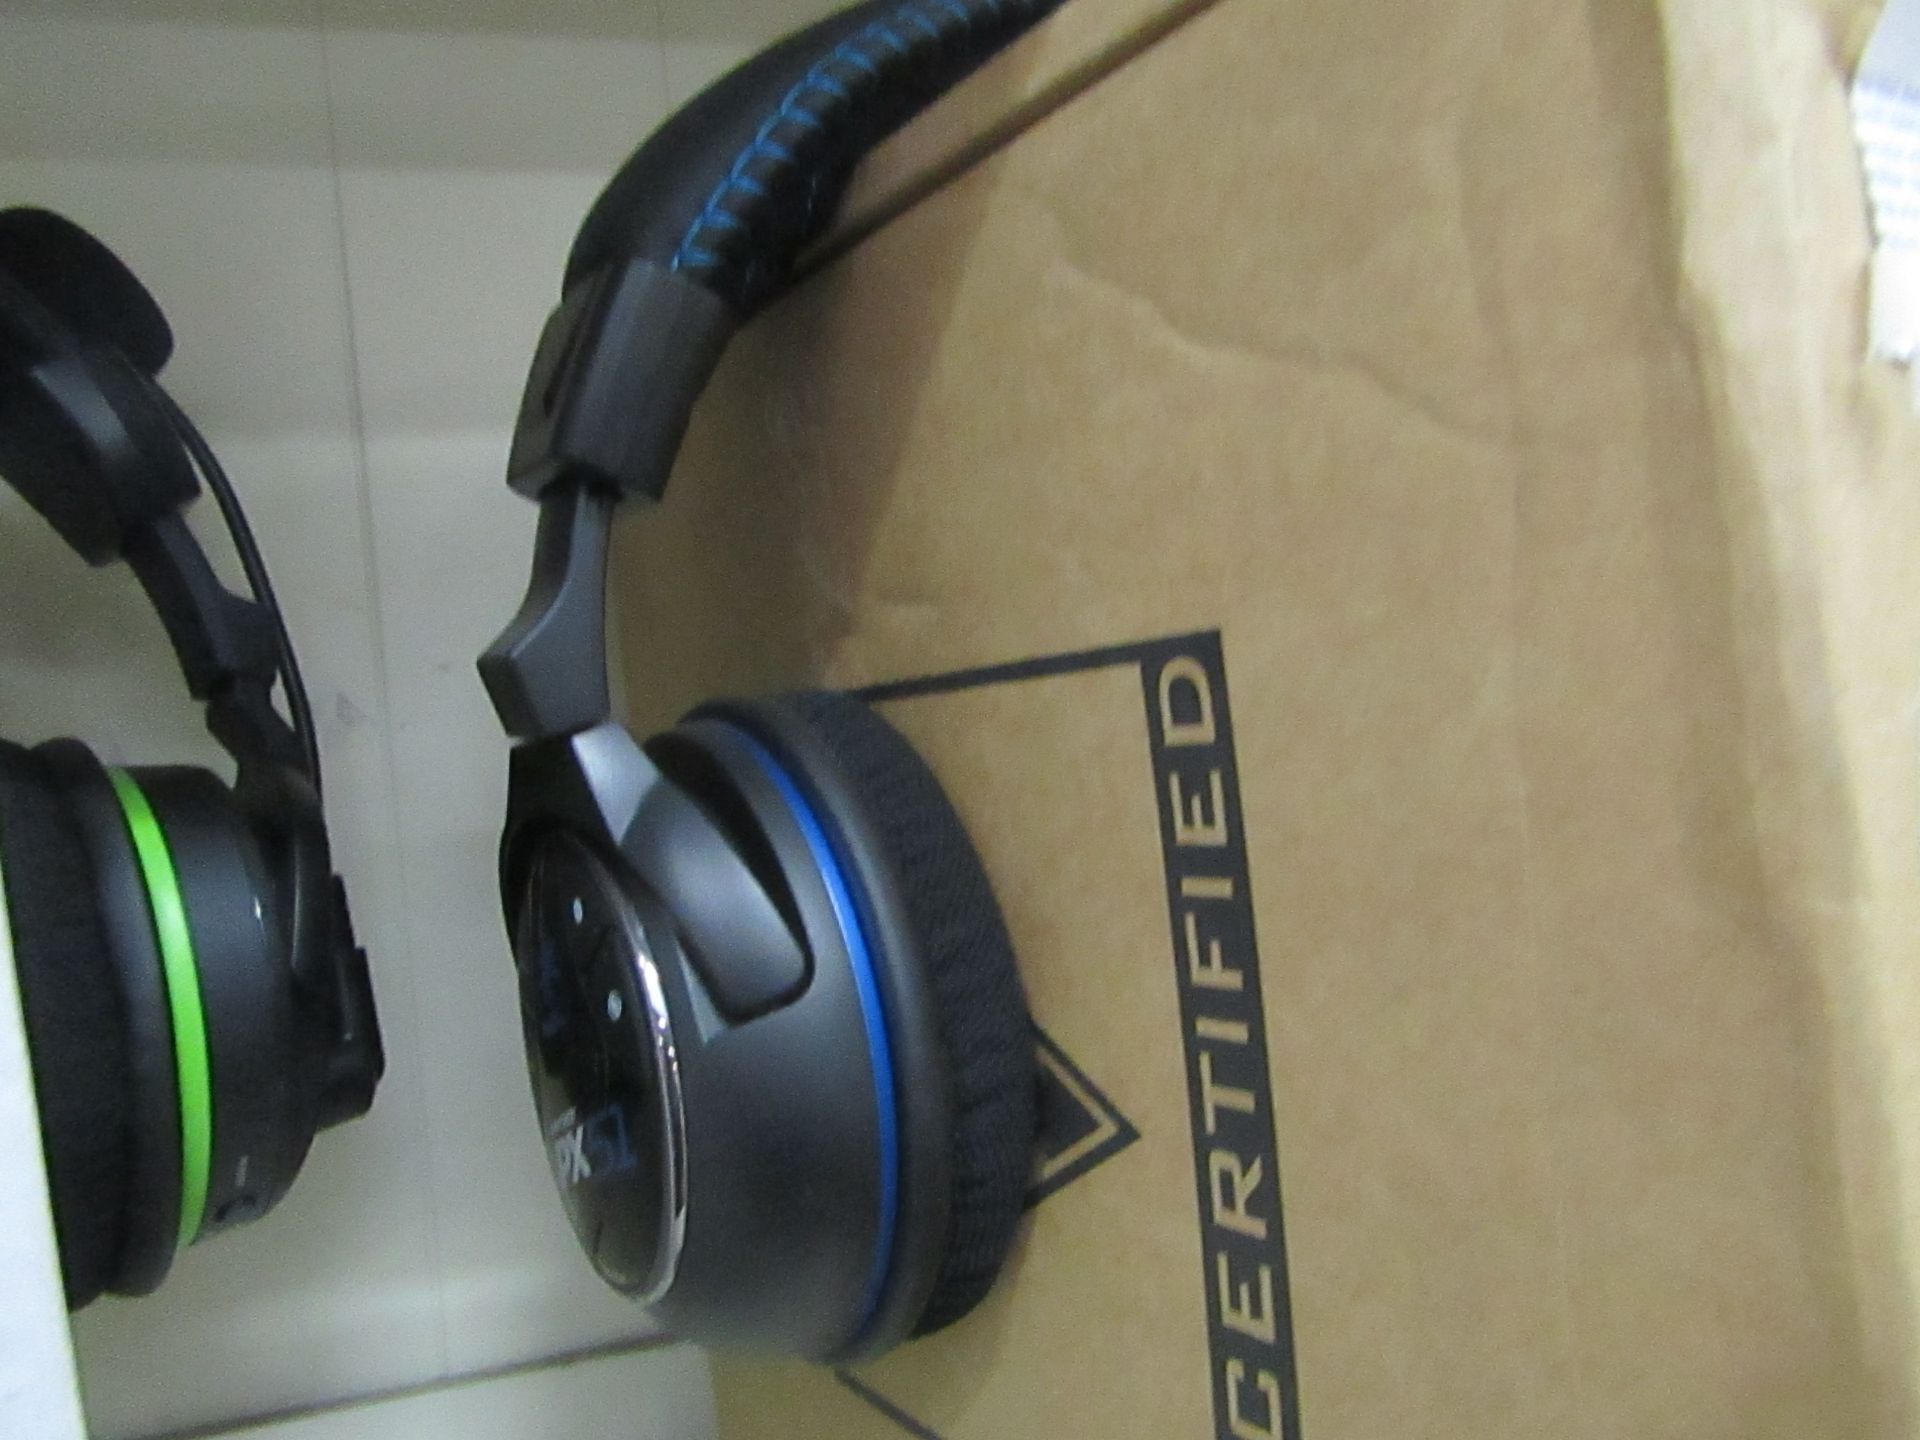 Turtle Beach PX51 gaming headset, tested working and boxed.